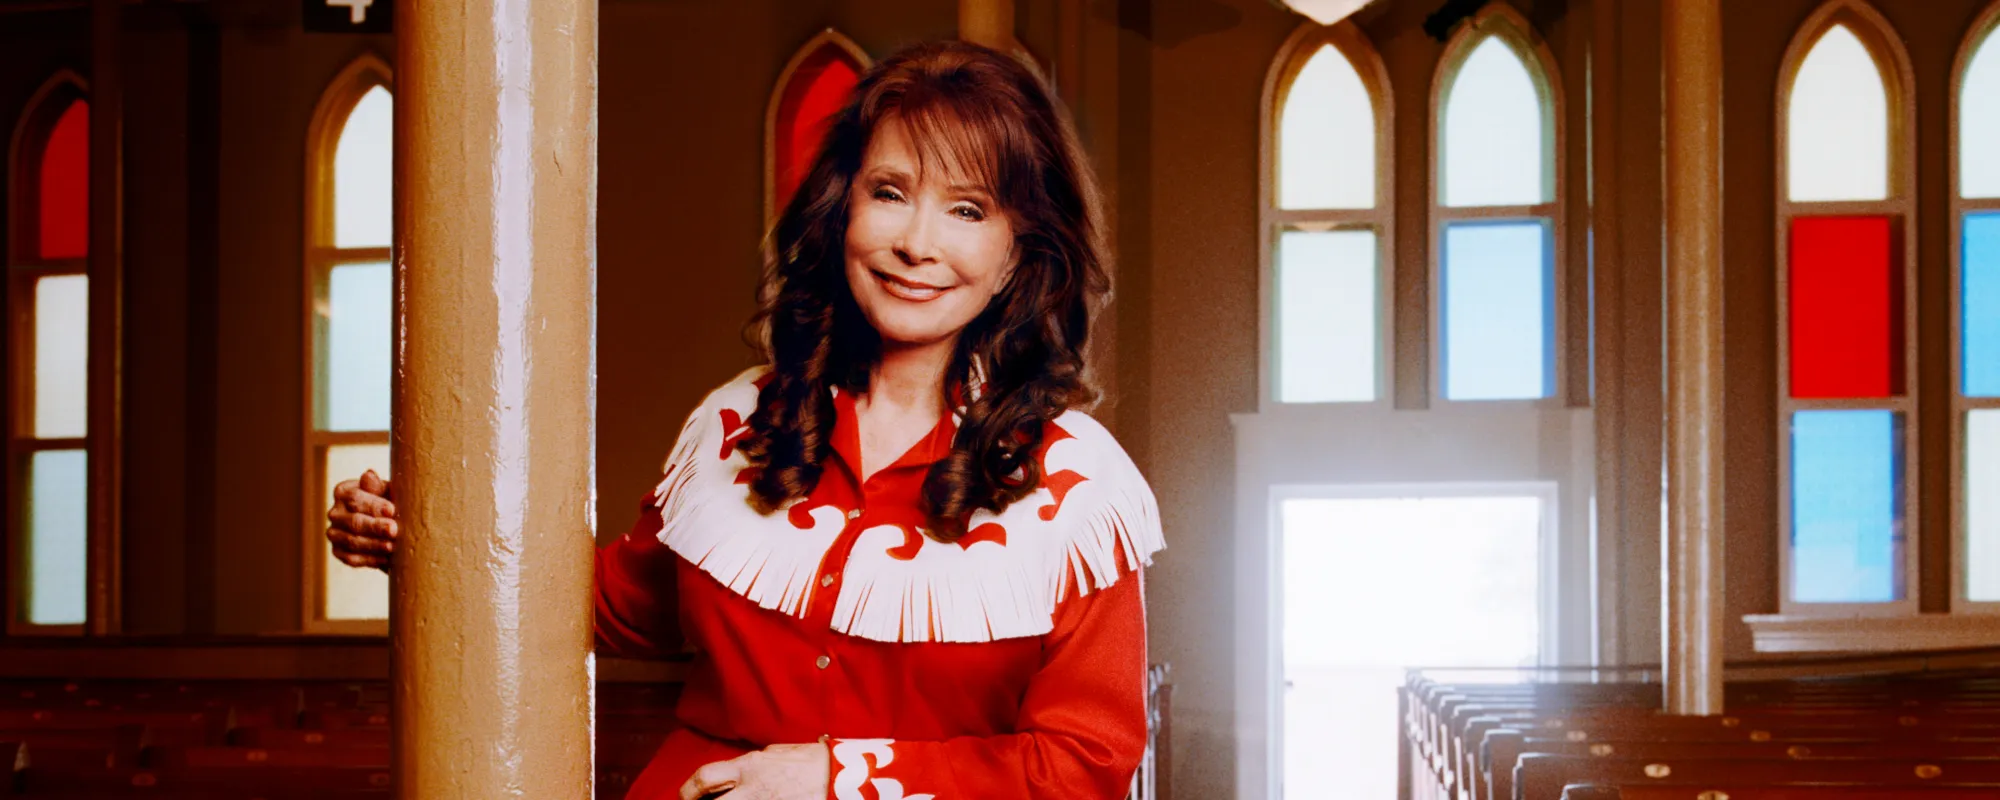 Behind the Song: “Coal Miner’s Daughter” by Loretta Lynn